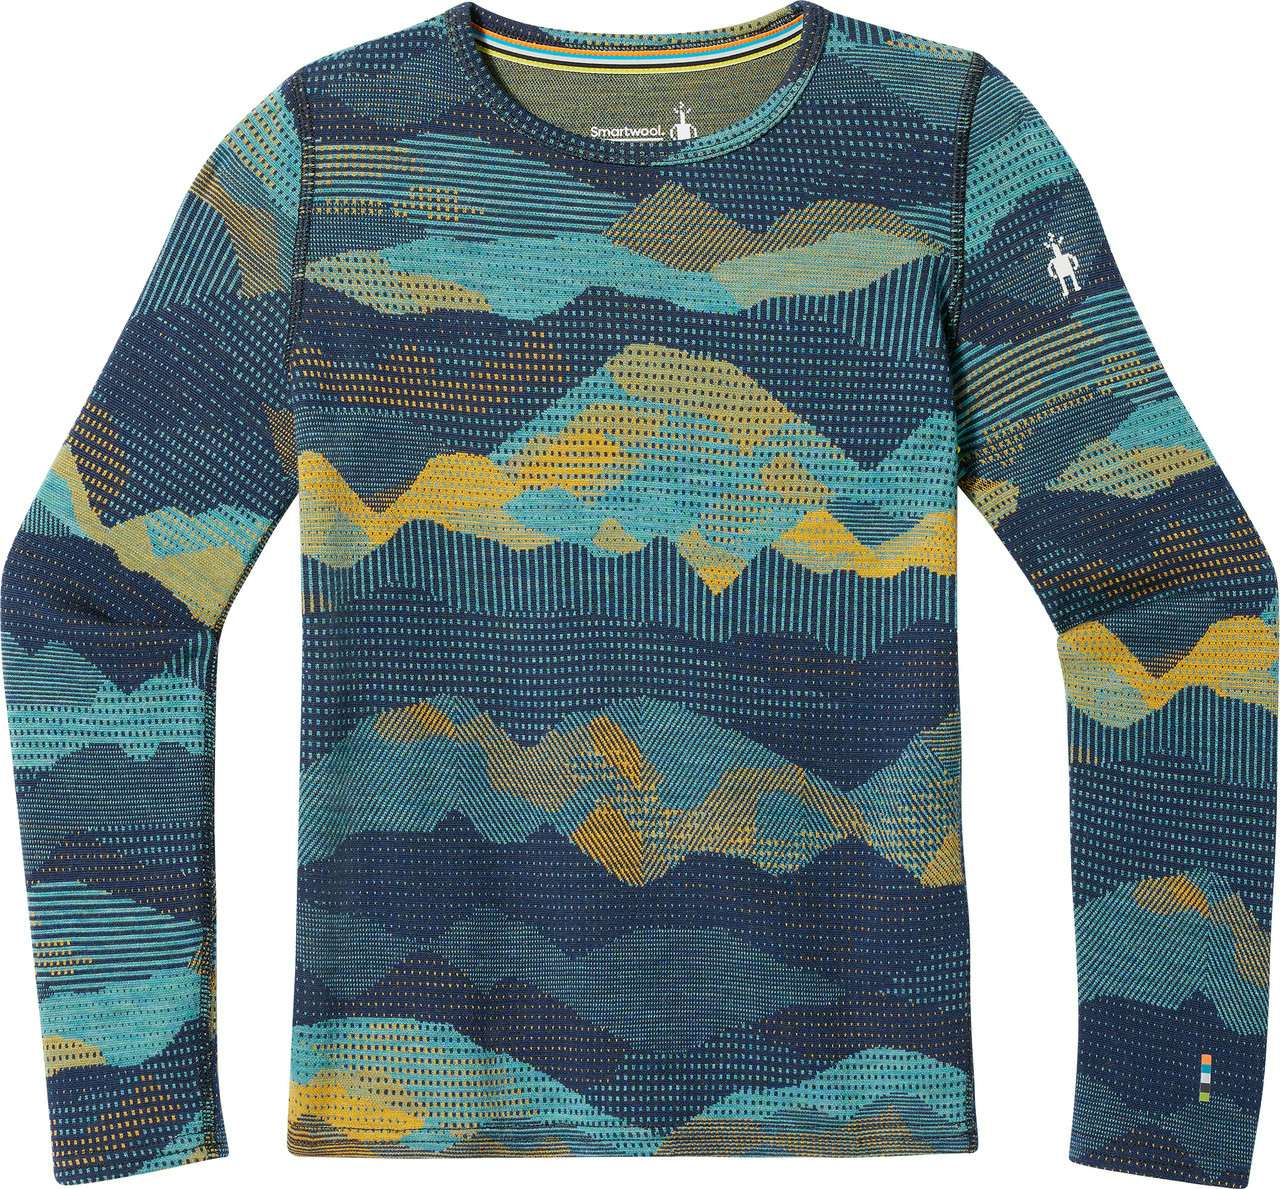 Classic Thermal Merino Base Layer Pattern Crew Top Blueberry Mountain Scape